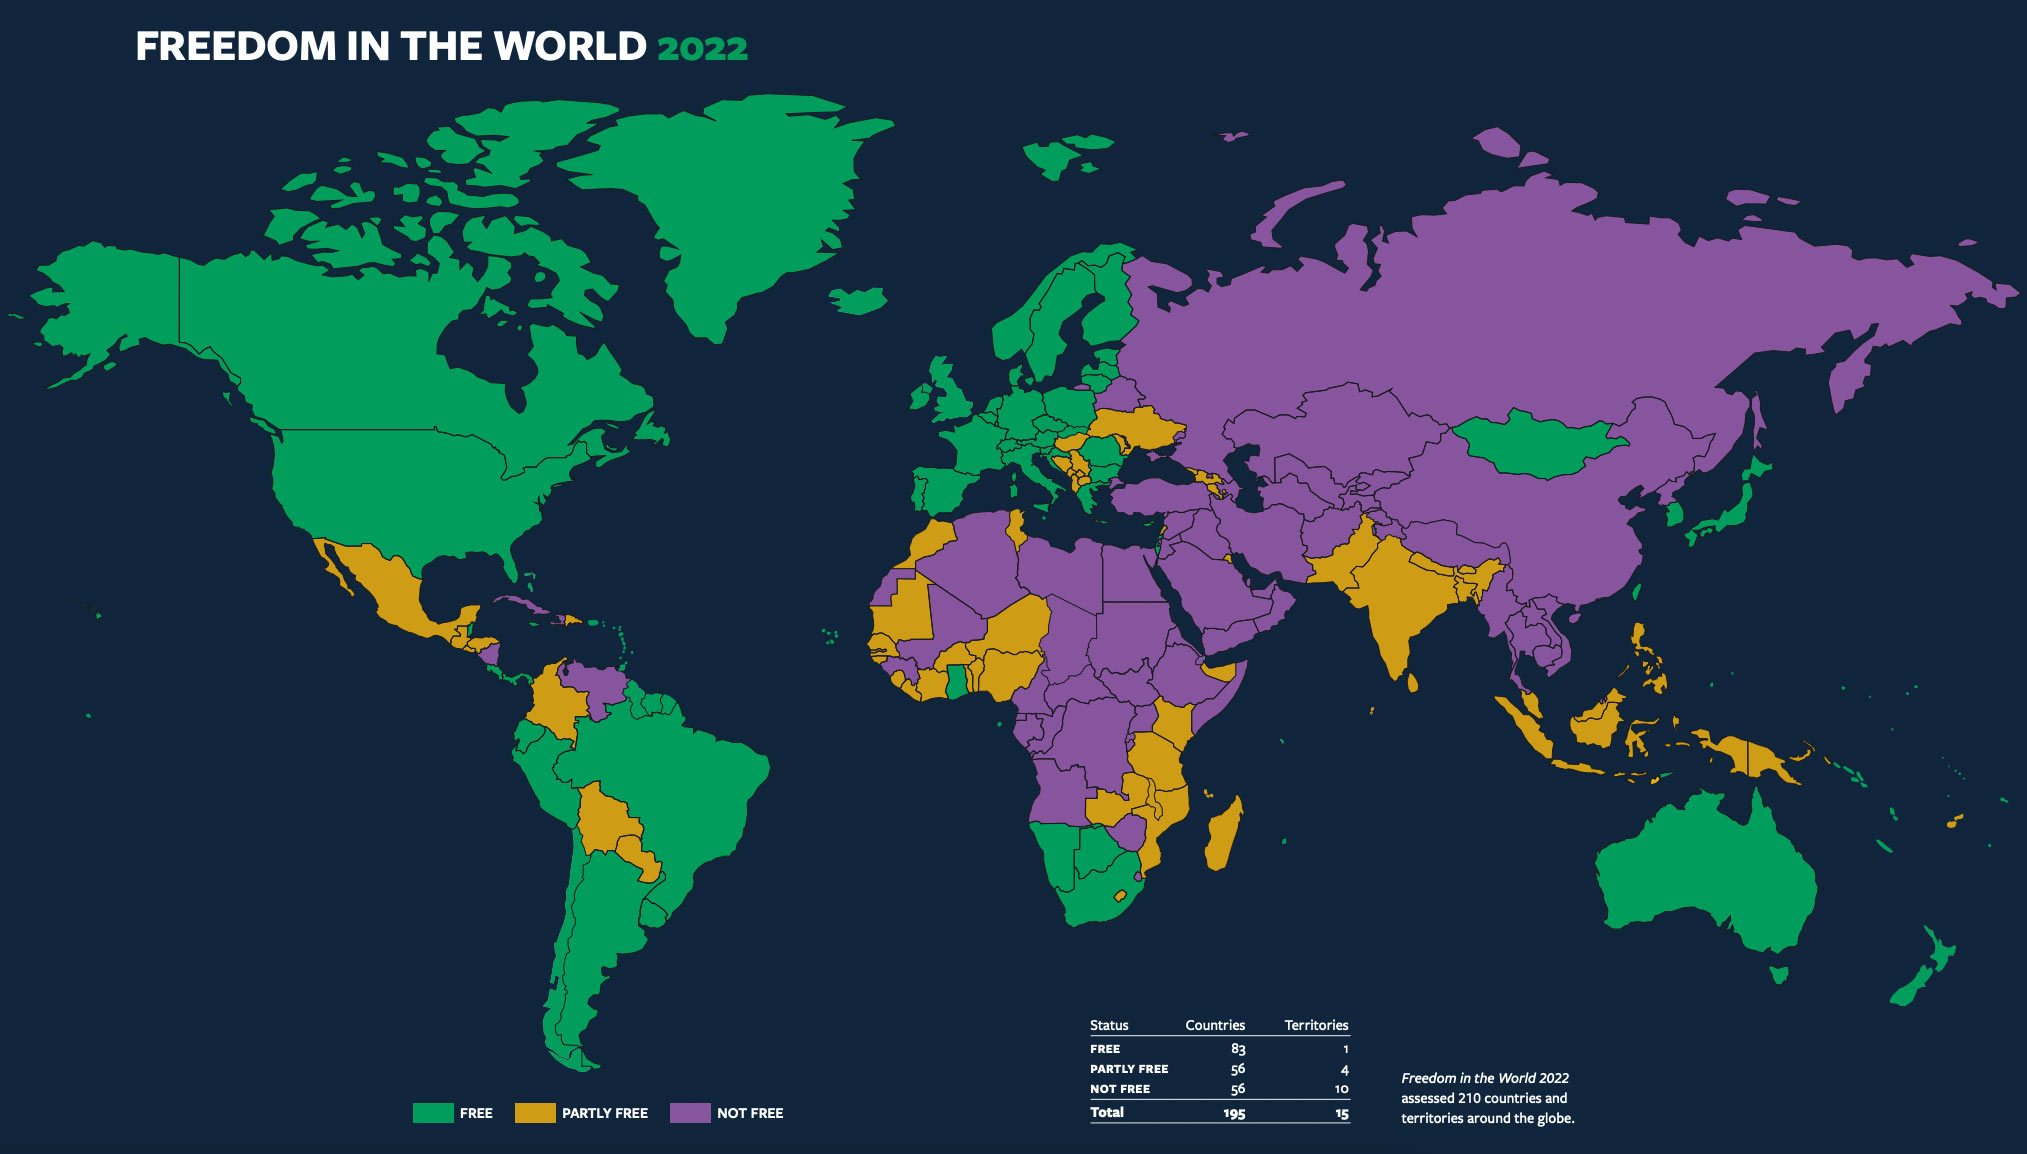 Current Not Free (Dictatorships) Countries of the World - 2022